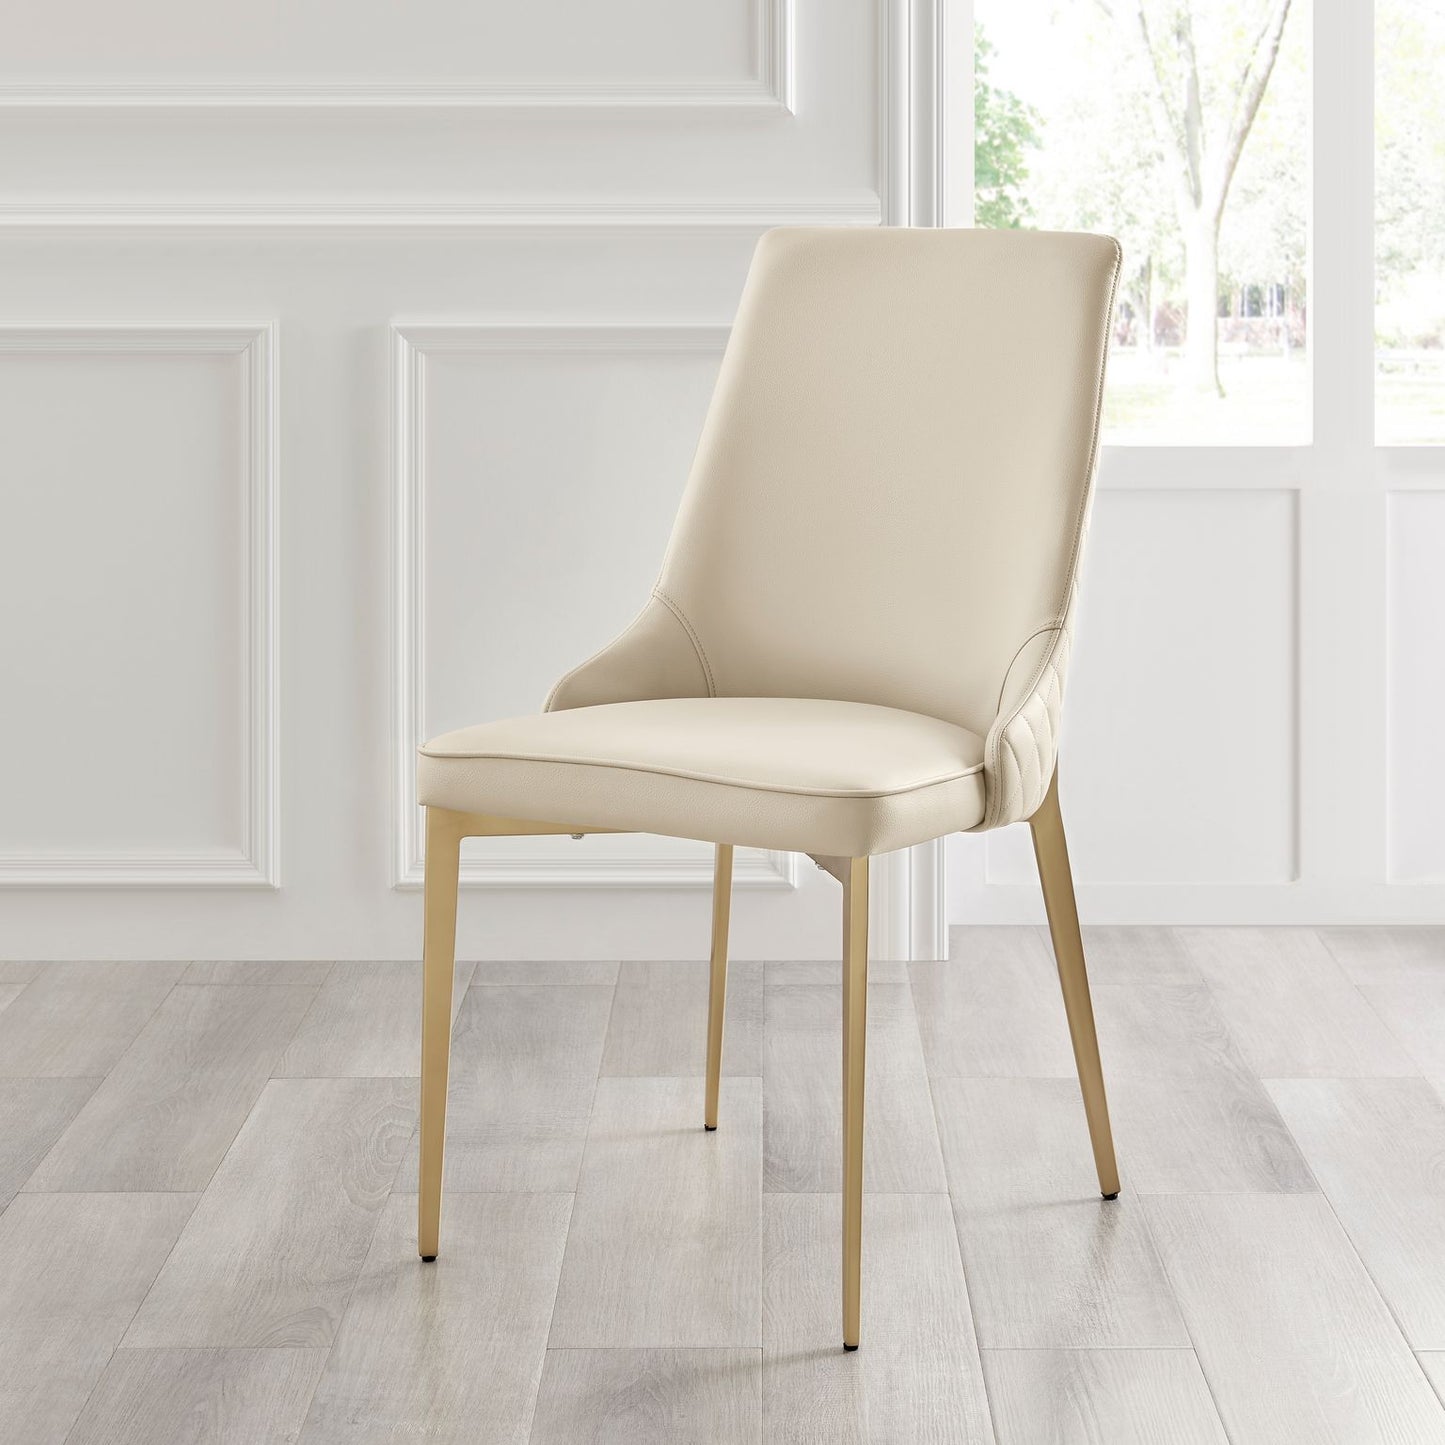 Beige Dining Chair in Faux Leather With Gold Legs